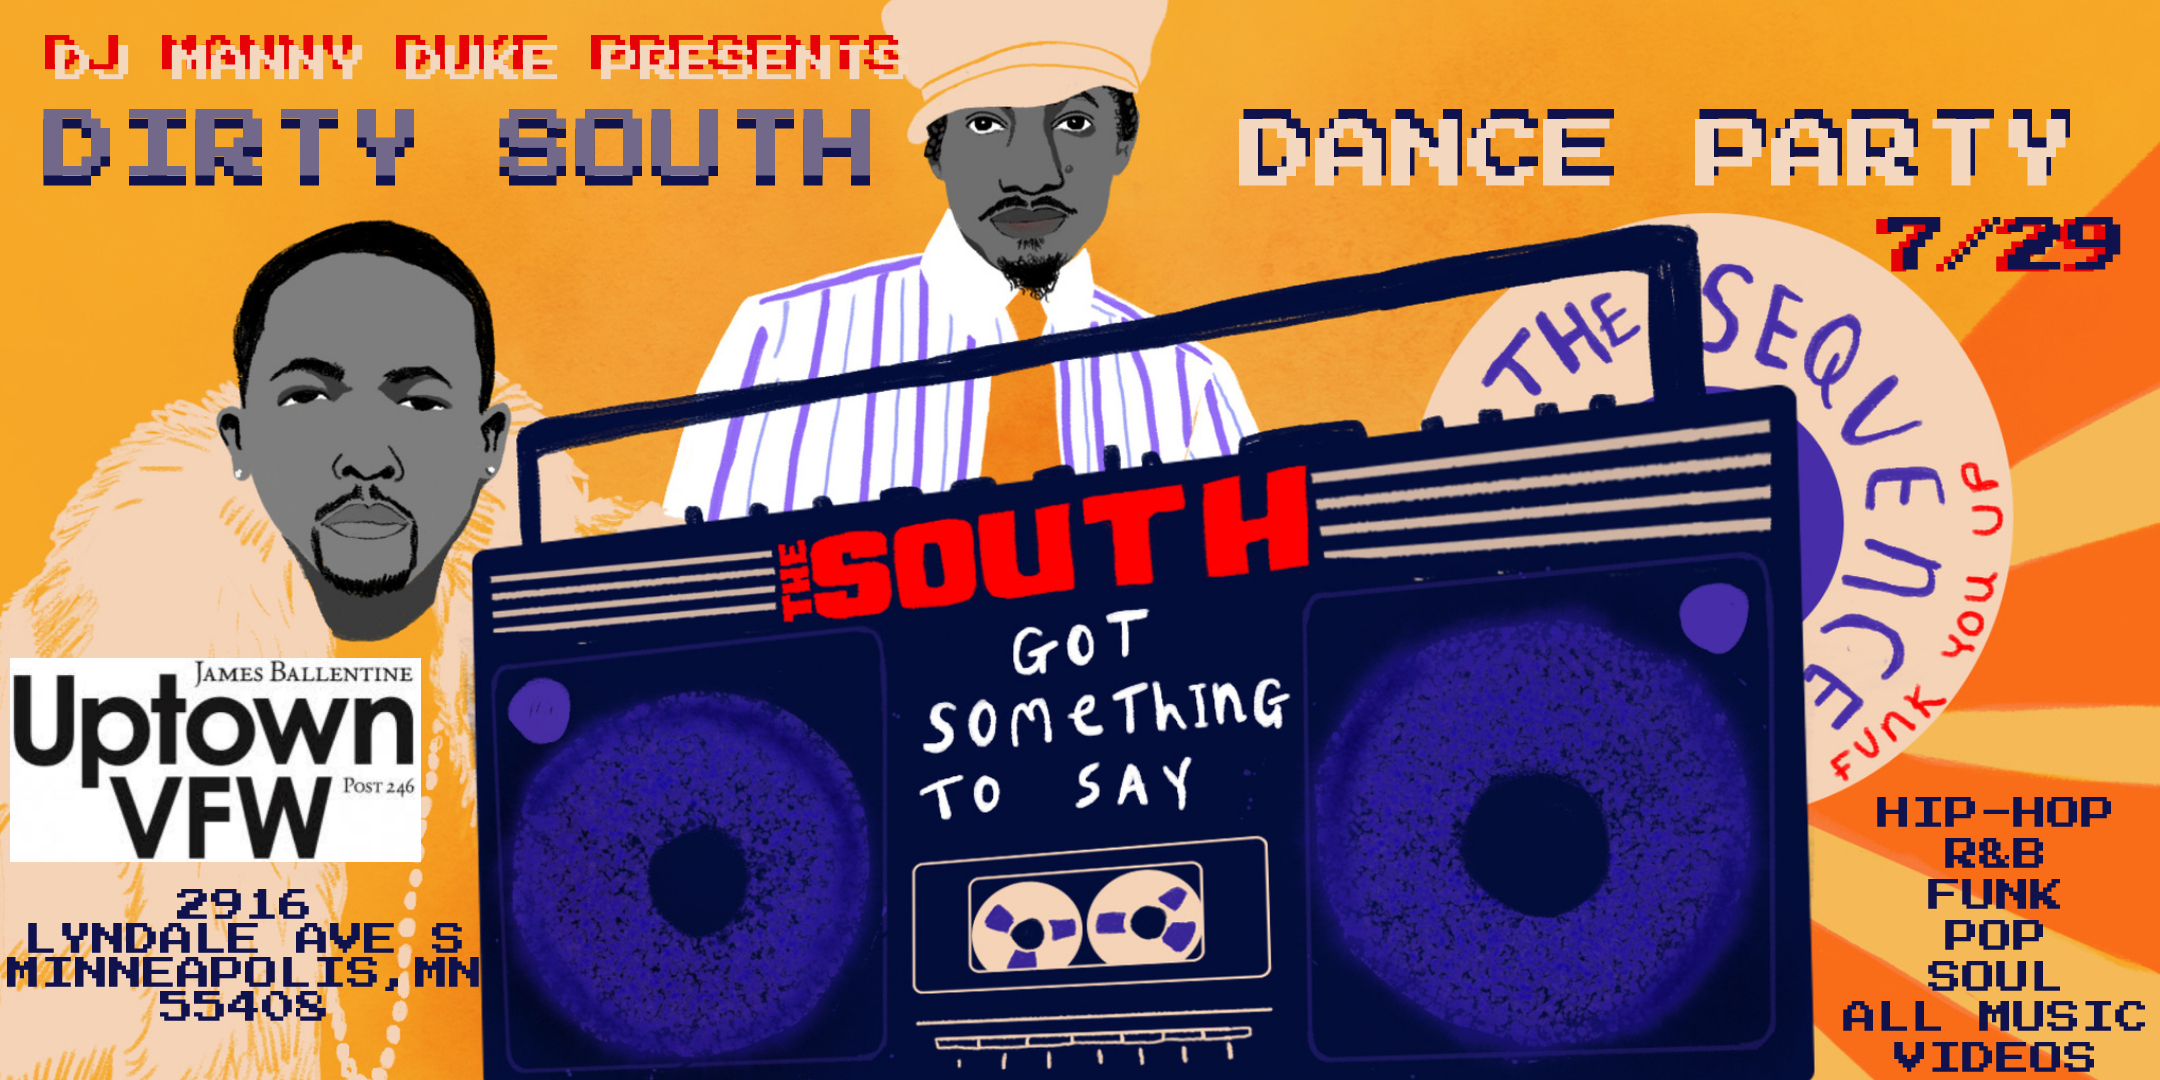 DJ Manny Presents: Dirty South Dance Party Saturday July 29 James Ballentine "Uptown" VFW Post 246 2916 Lyndale Ave S. Doors 10:00pm :: Music 10:00pm :: 21+ GA $5 ADV / $10 DOS NO REFUNDS